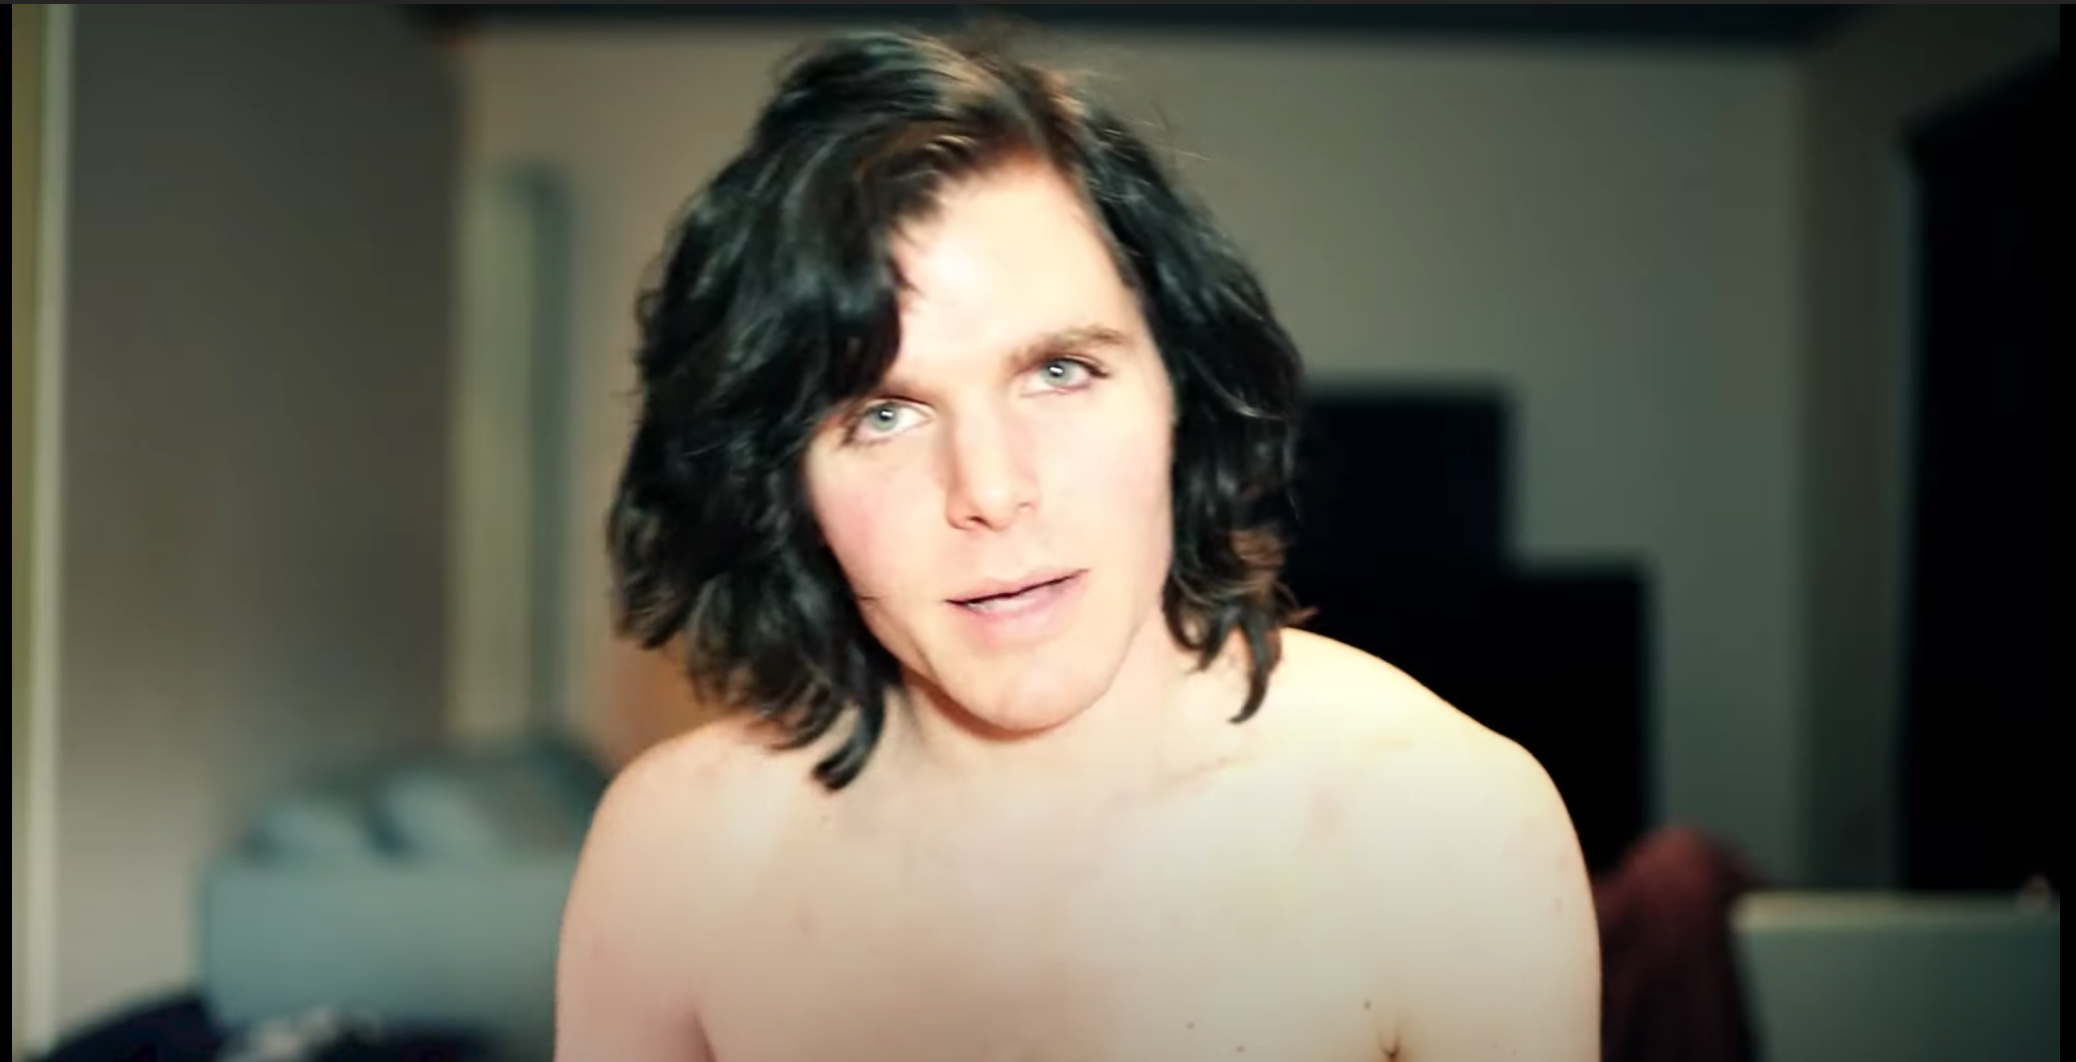 Why exactly has controversial YouTuber Onision been demonetized? 